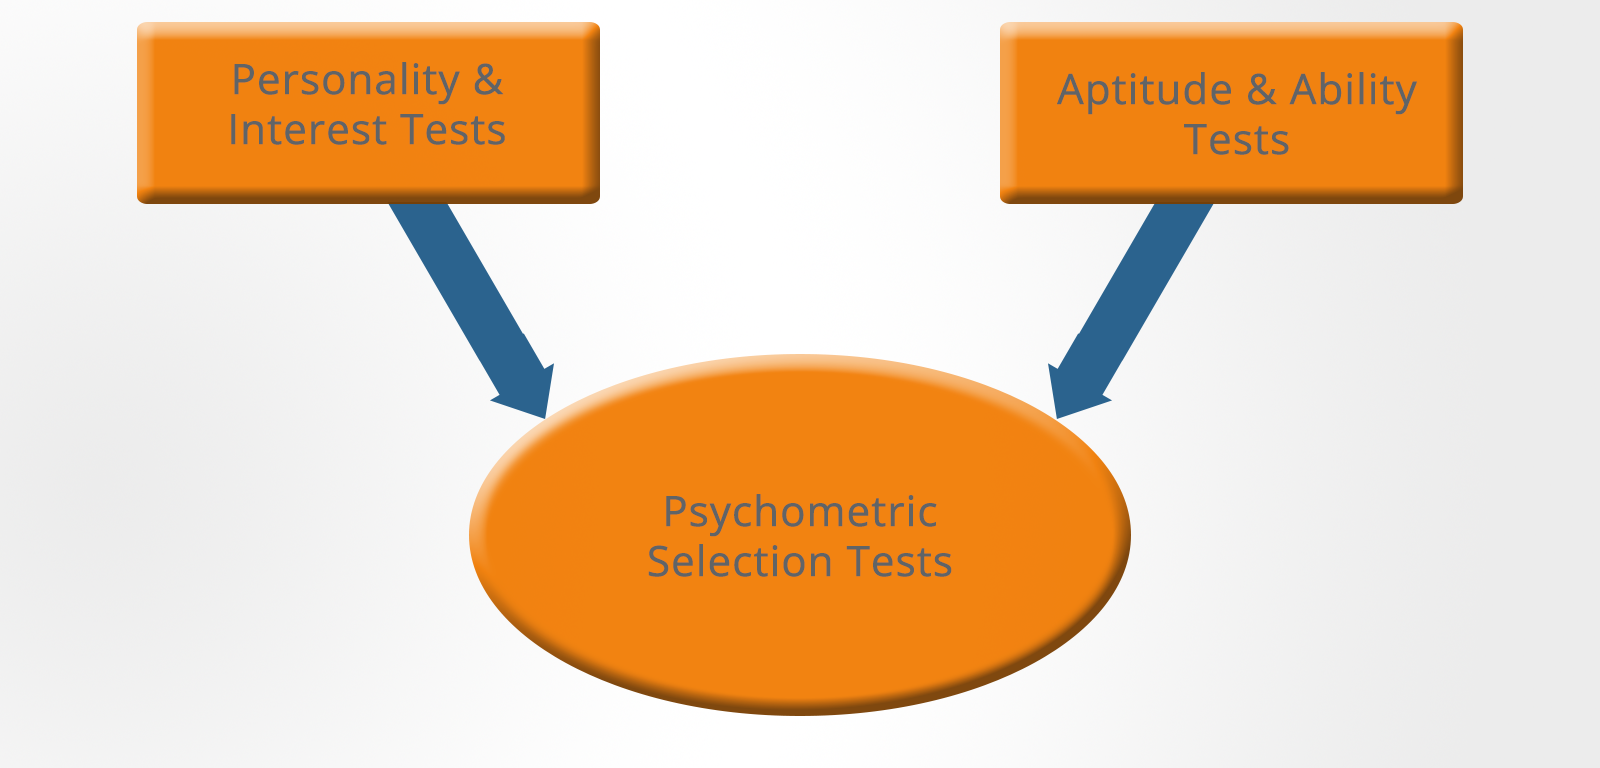 What are psychometric tests